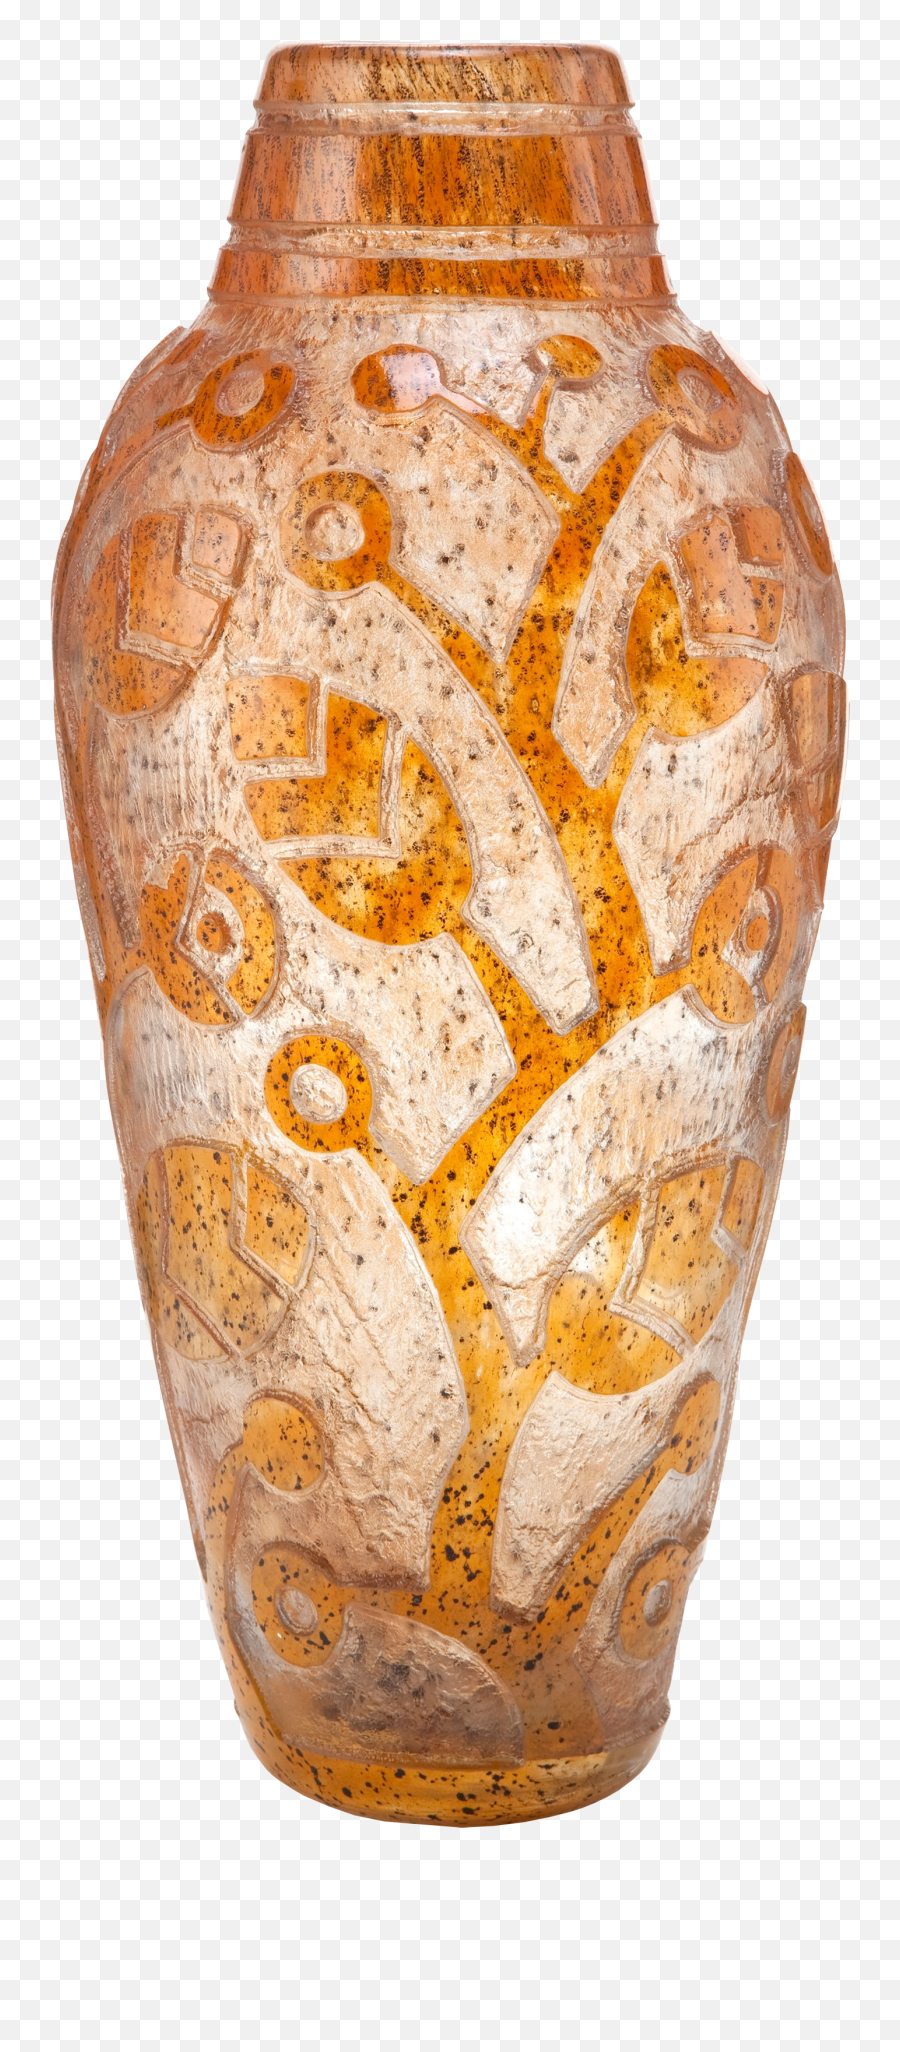 Vase Png Alpha Channel Clipart Images Pictures With Emoji,Pottery Clipart